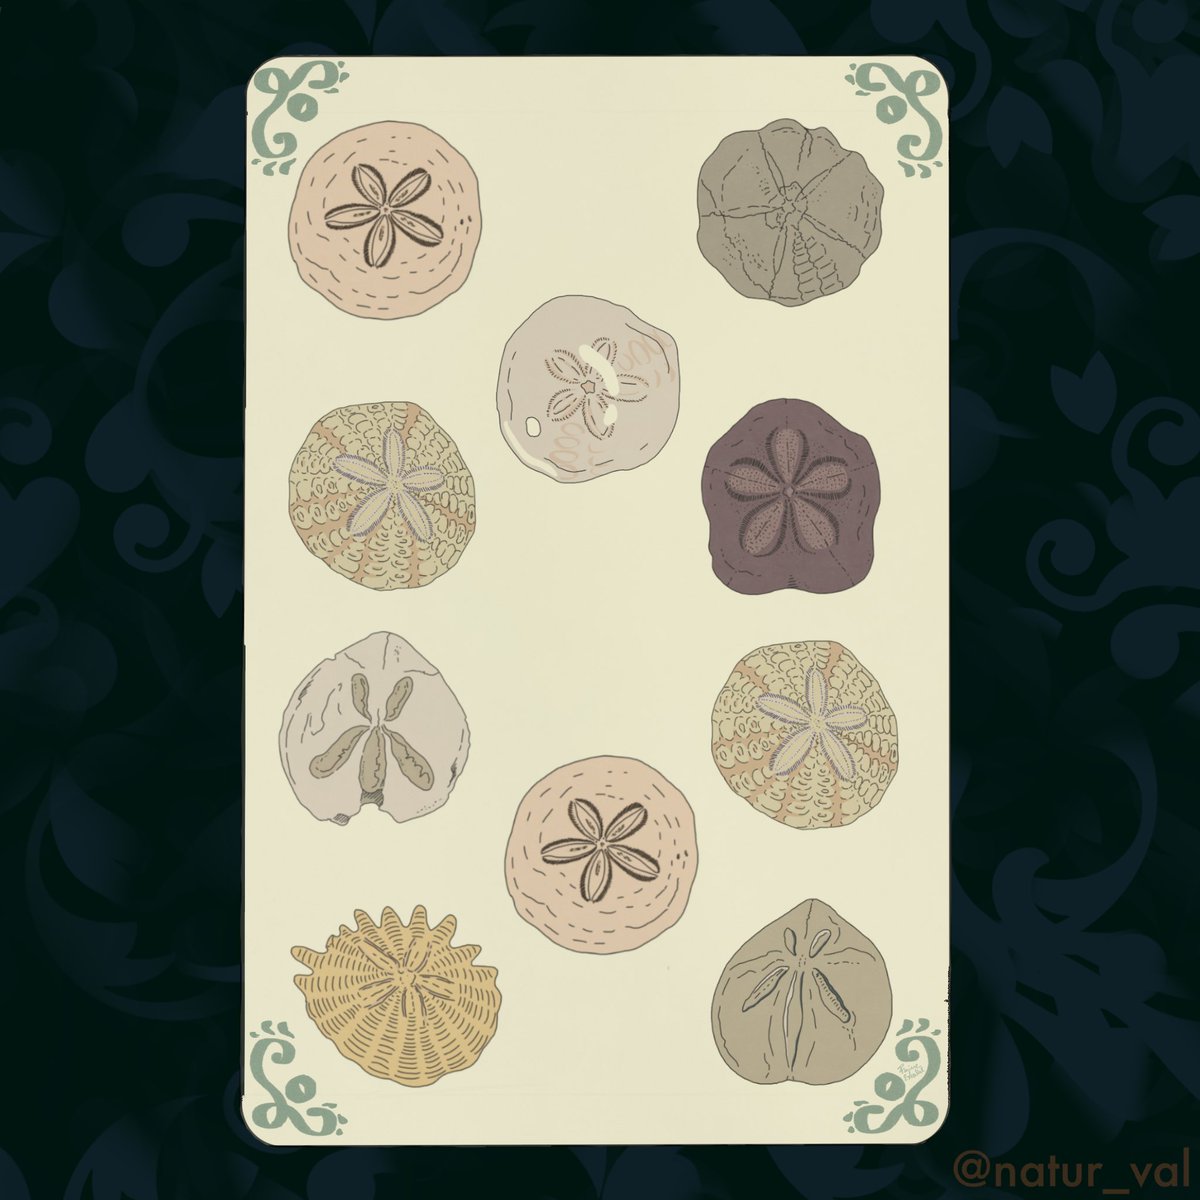 Tarots Before Time - Deniers. The suit of Pentacles. I chose “sand dollars” fossils, i.e. echinoids of the Dendrasteridae family characterized by a rounded and flattened shape that resembles a coin. P.S. There are actually a couple of interlopers from other genres. 10: prestige